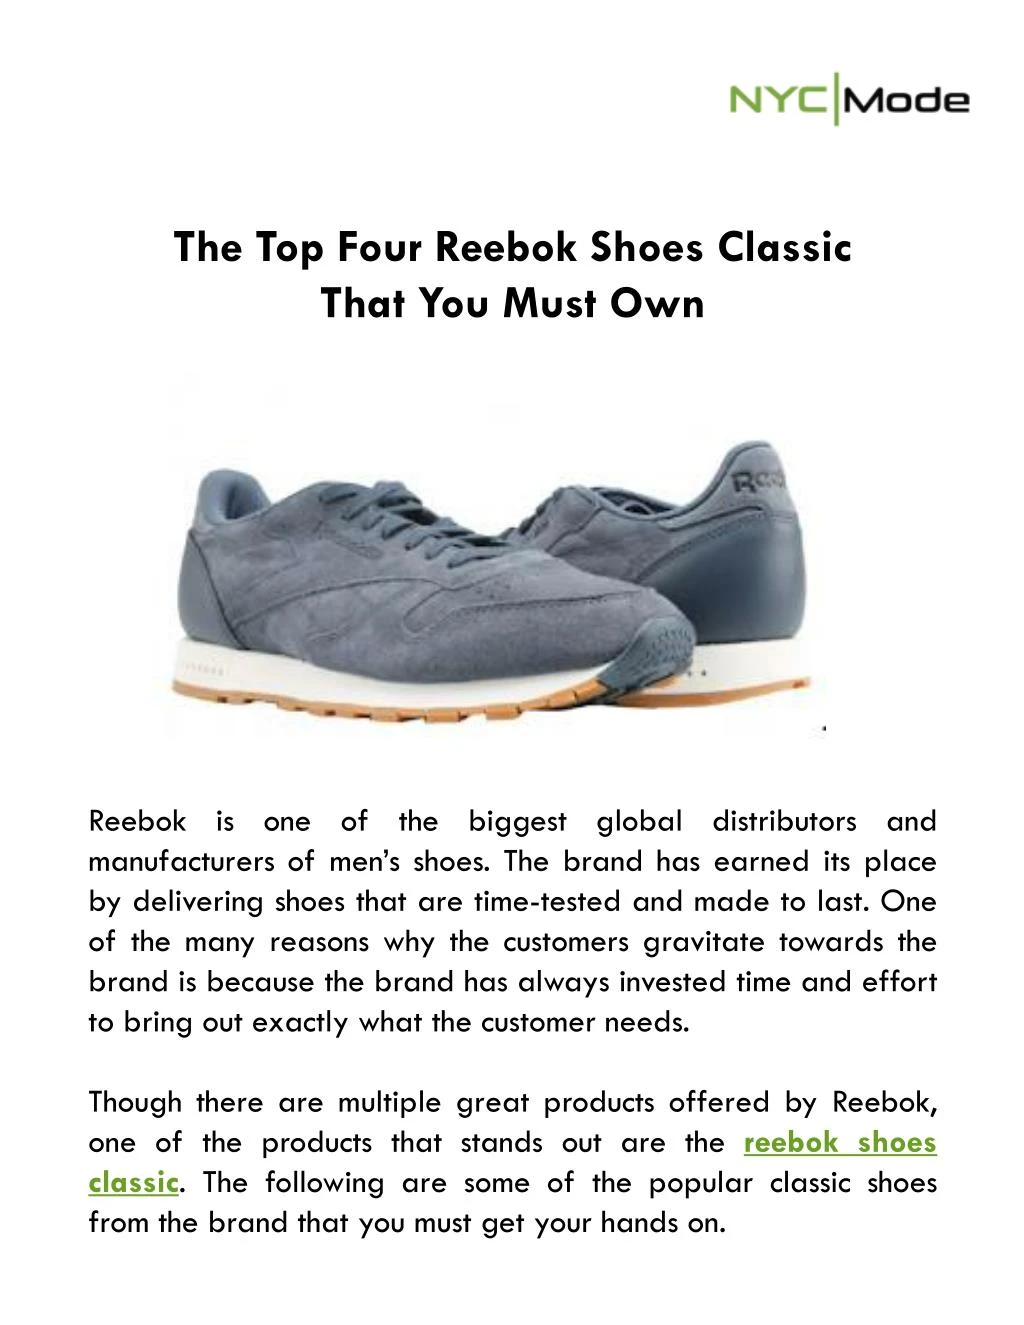 the top four reebok shoes classic that you must